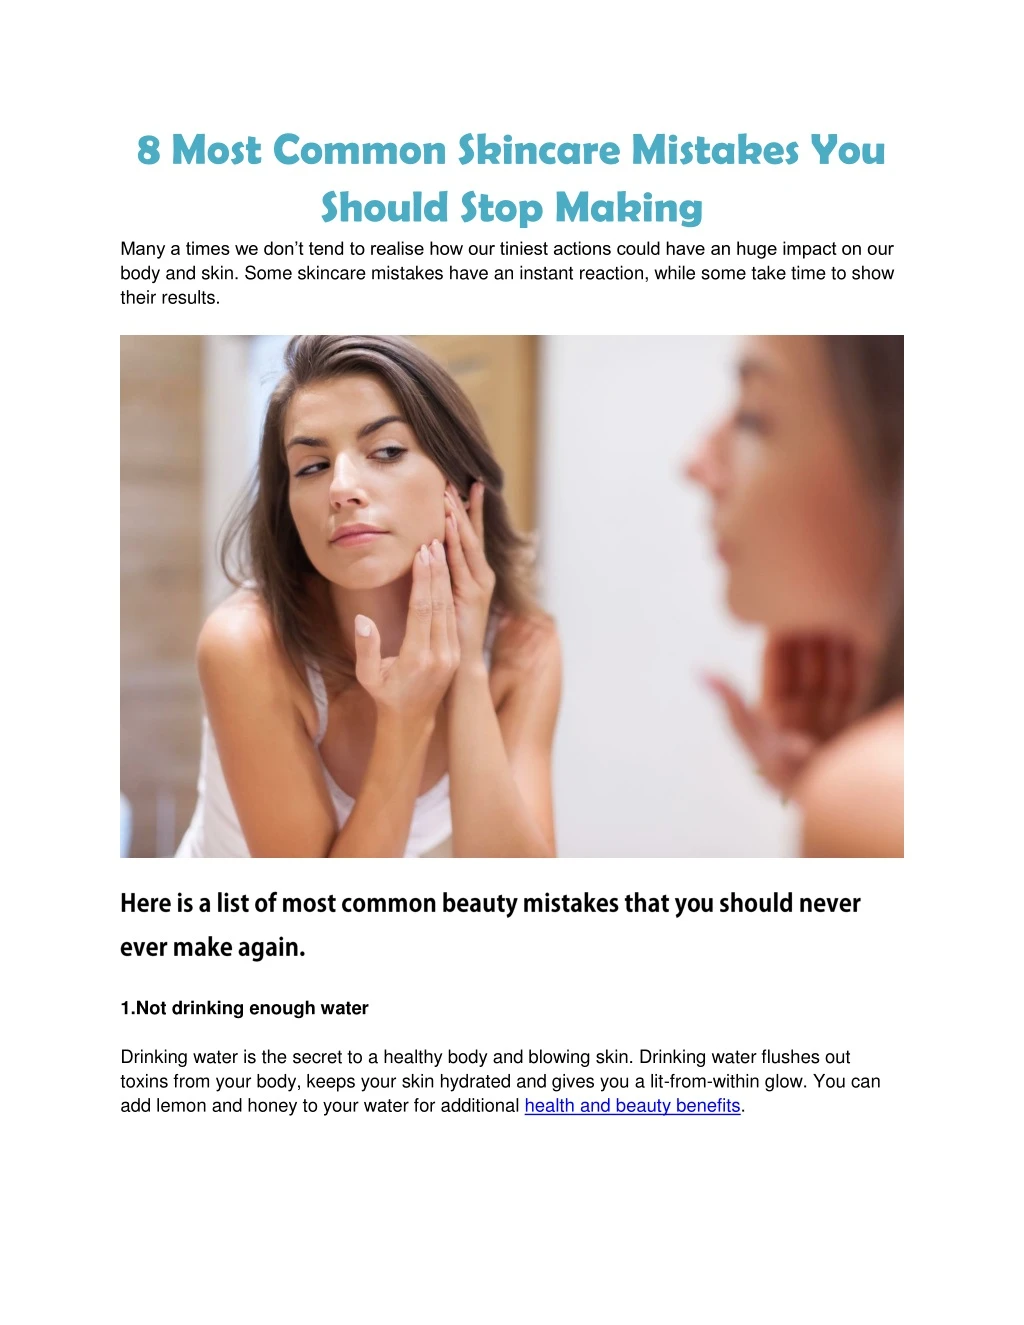 8 most common skincare mistakes you should stop